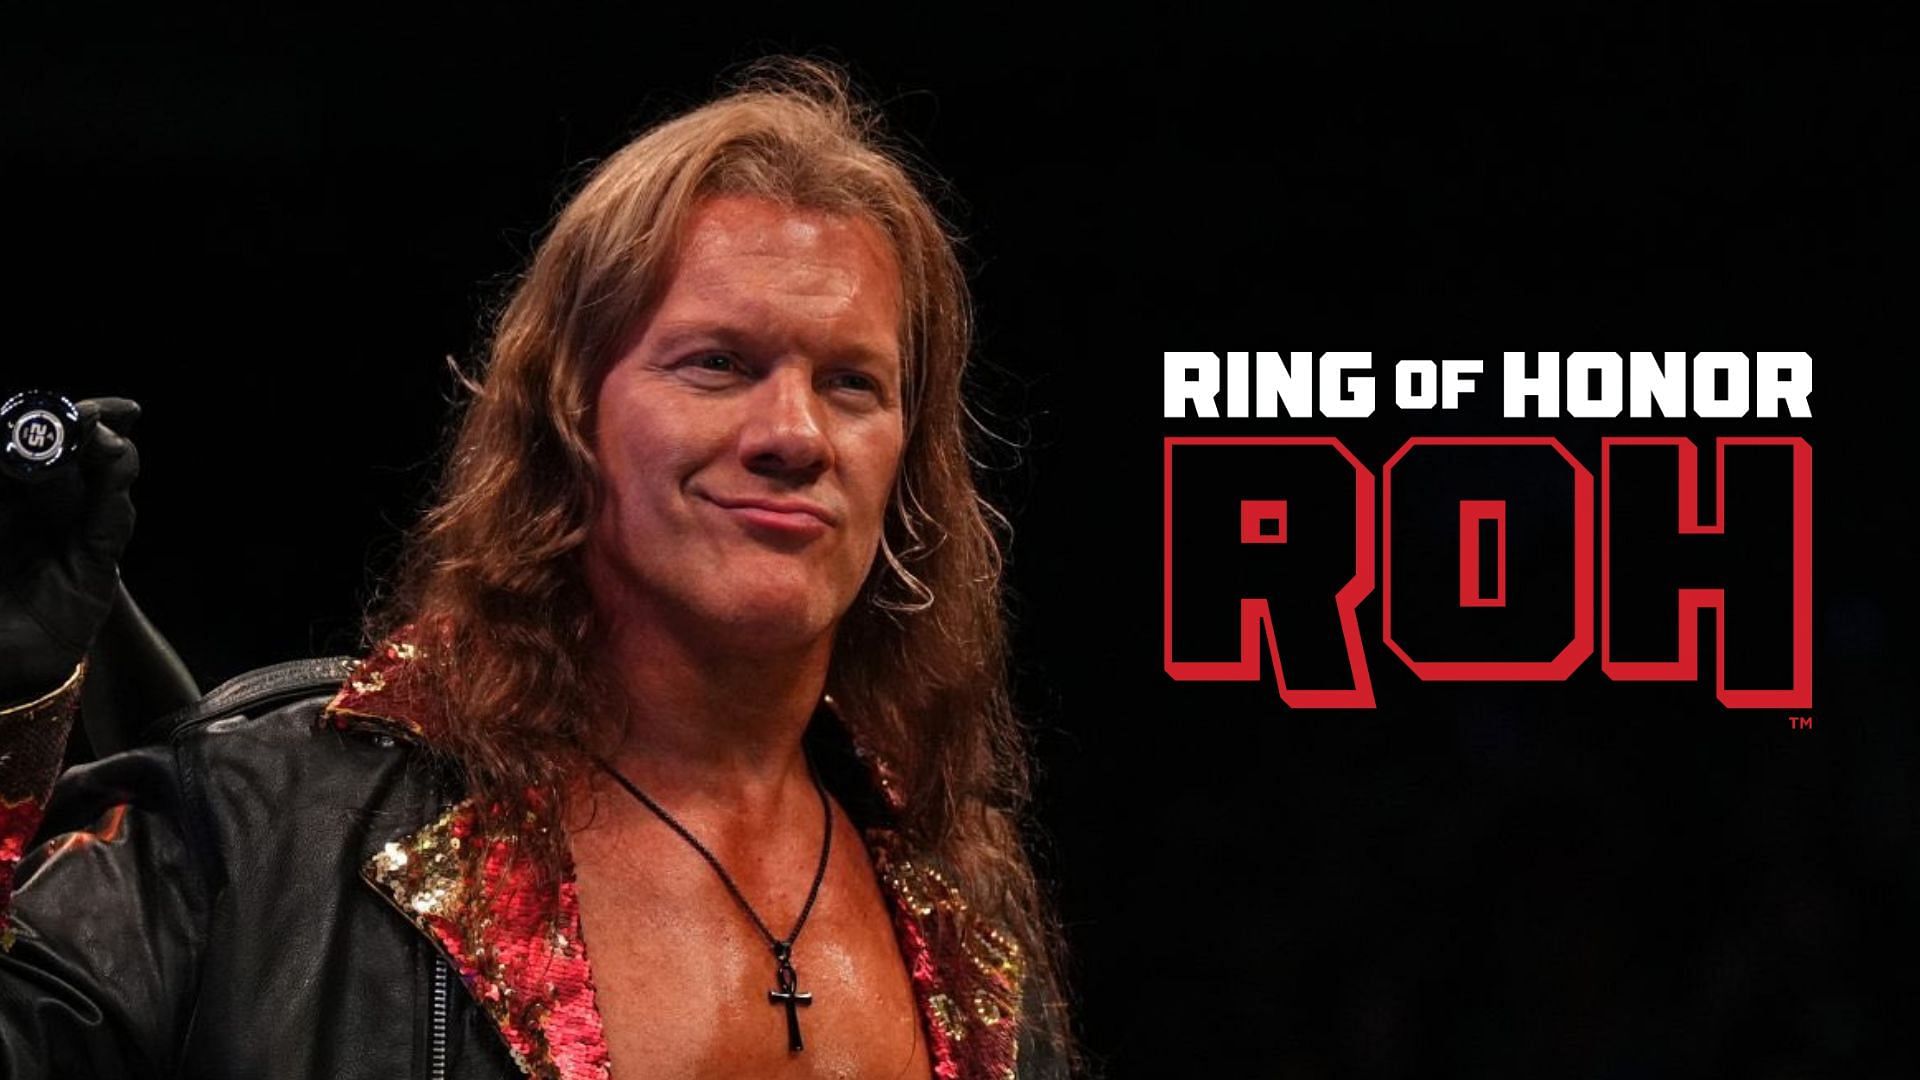 Will this former ROH World Champion face Chris Jericho on AEW Dynamite?